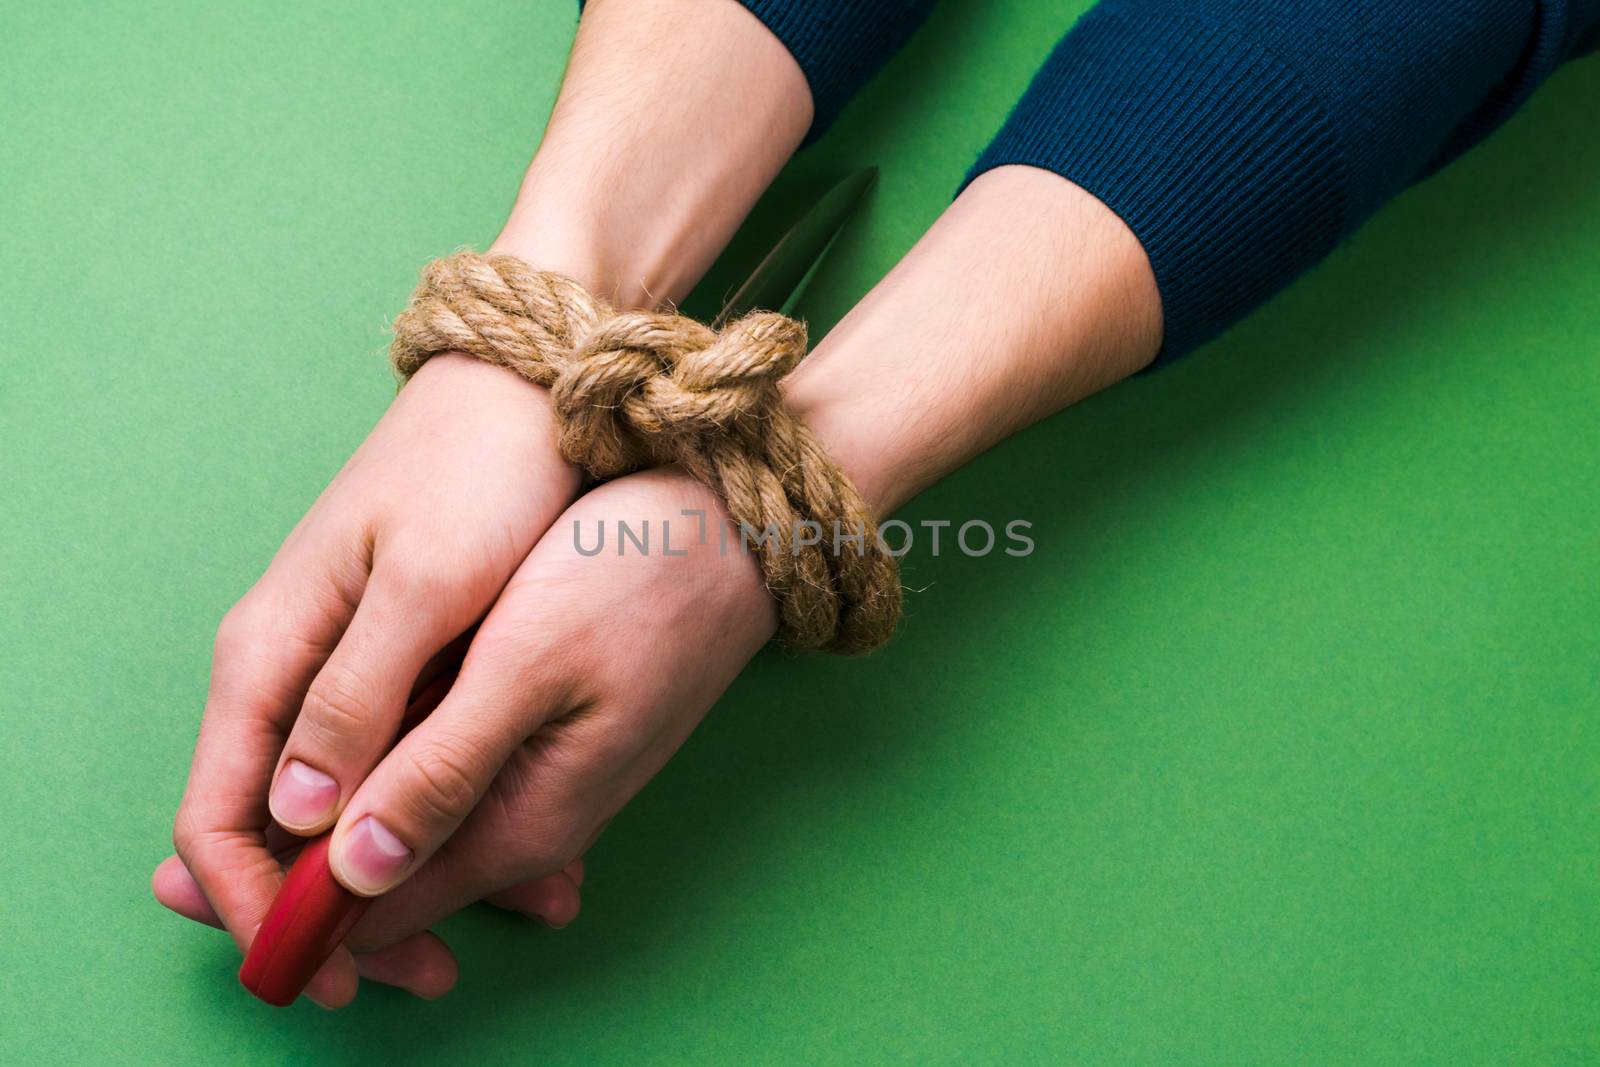 The man with bound hands and knife on green background